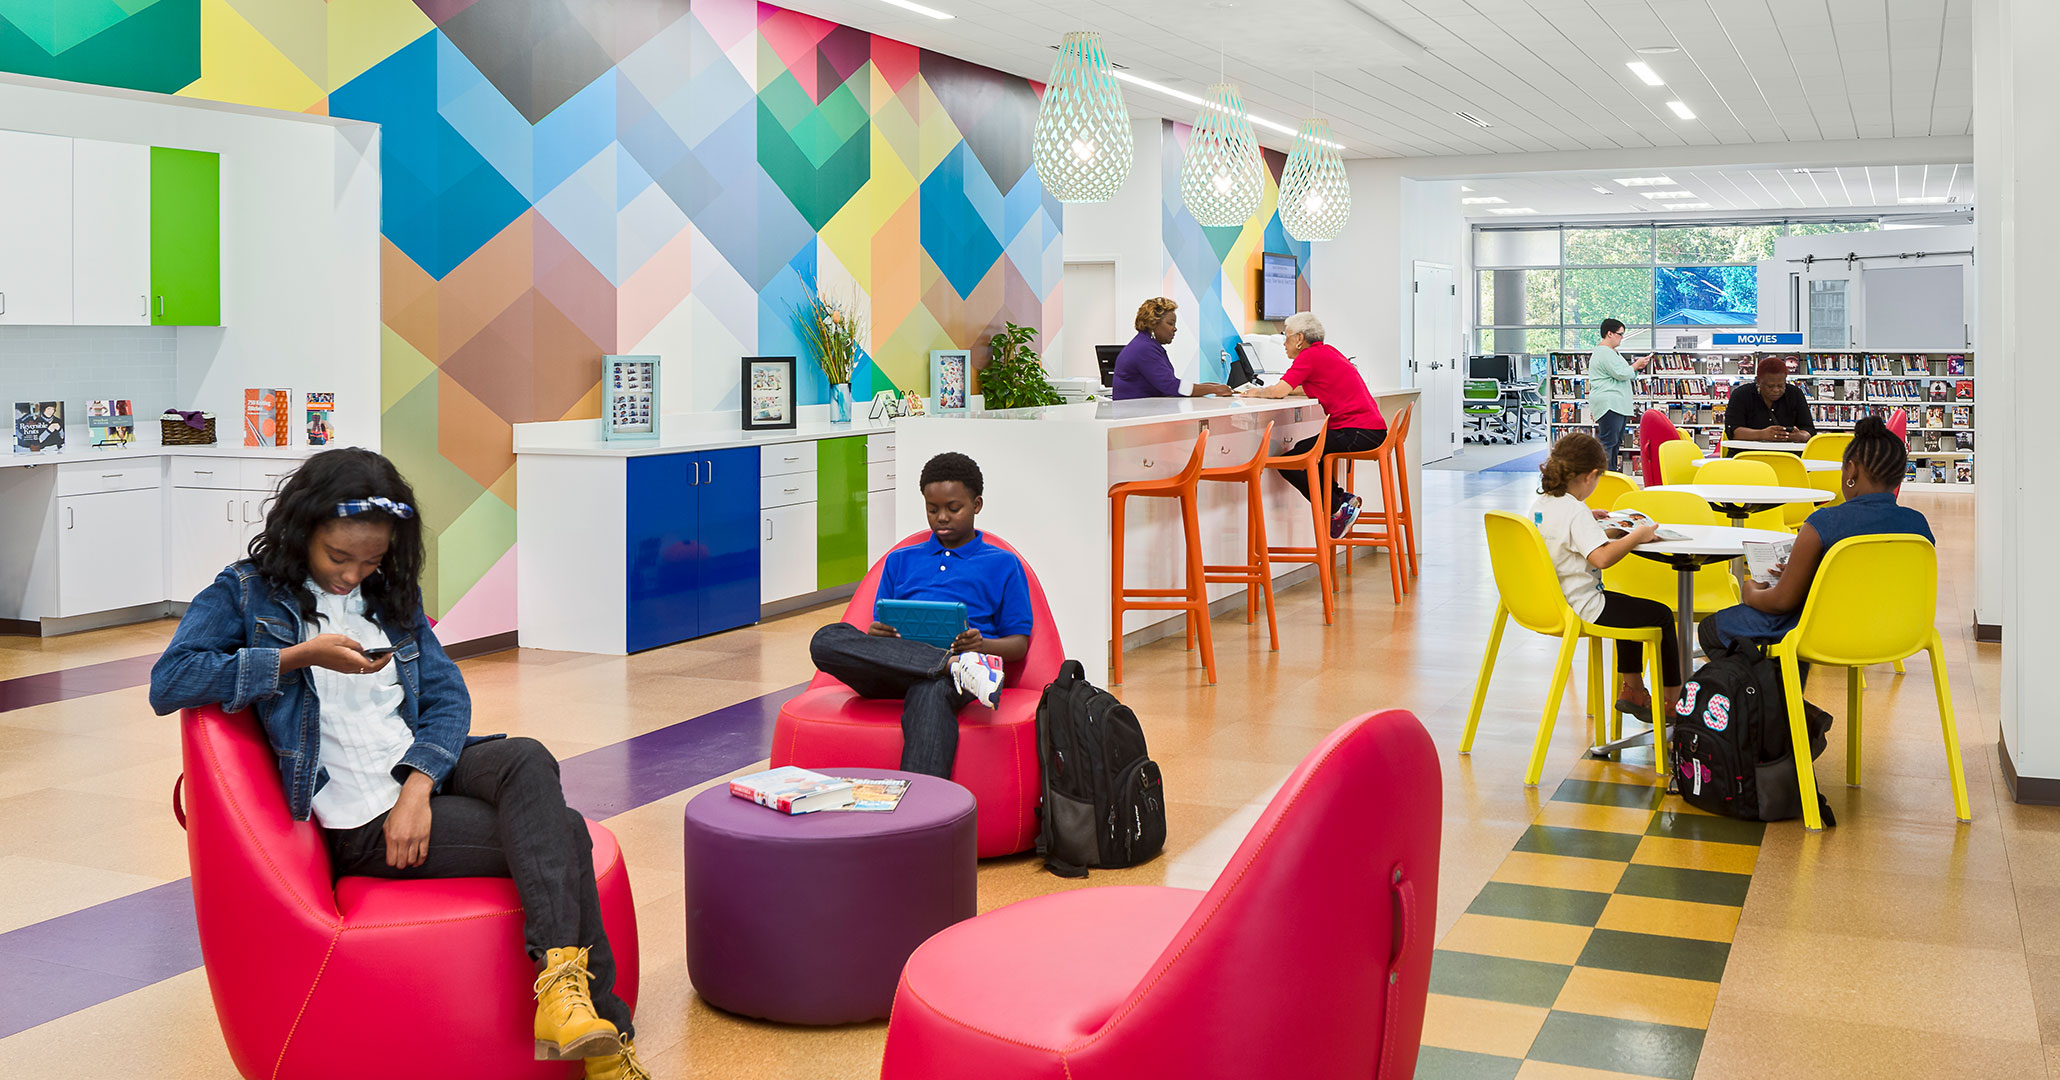 Richland County Library’s North Main location worked with Boudreaux to design colorful spaces.